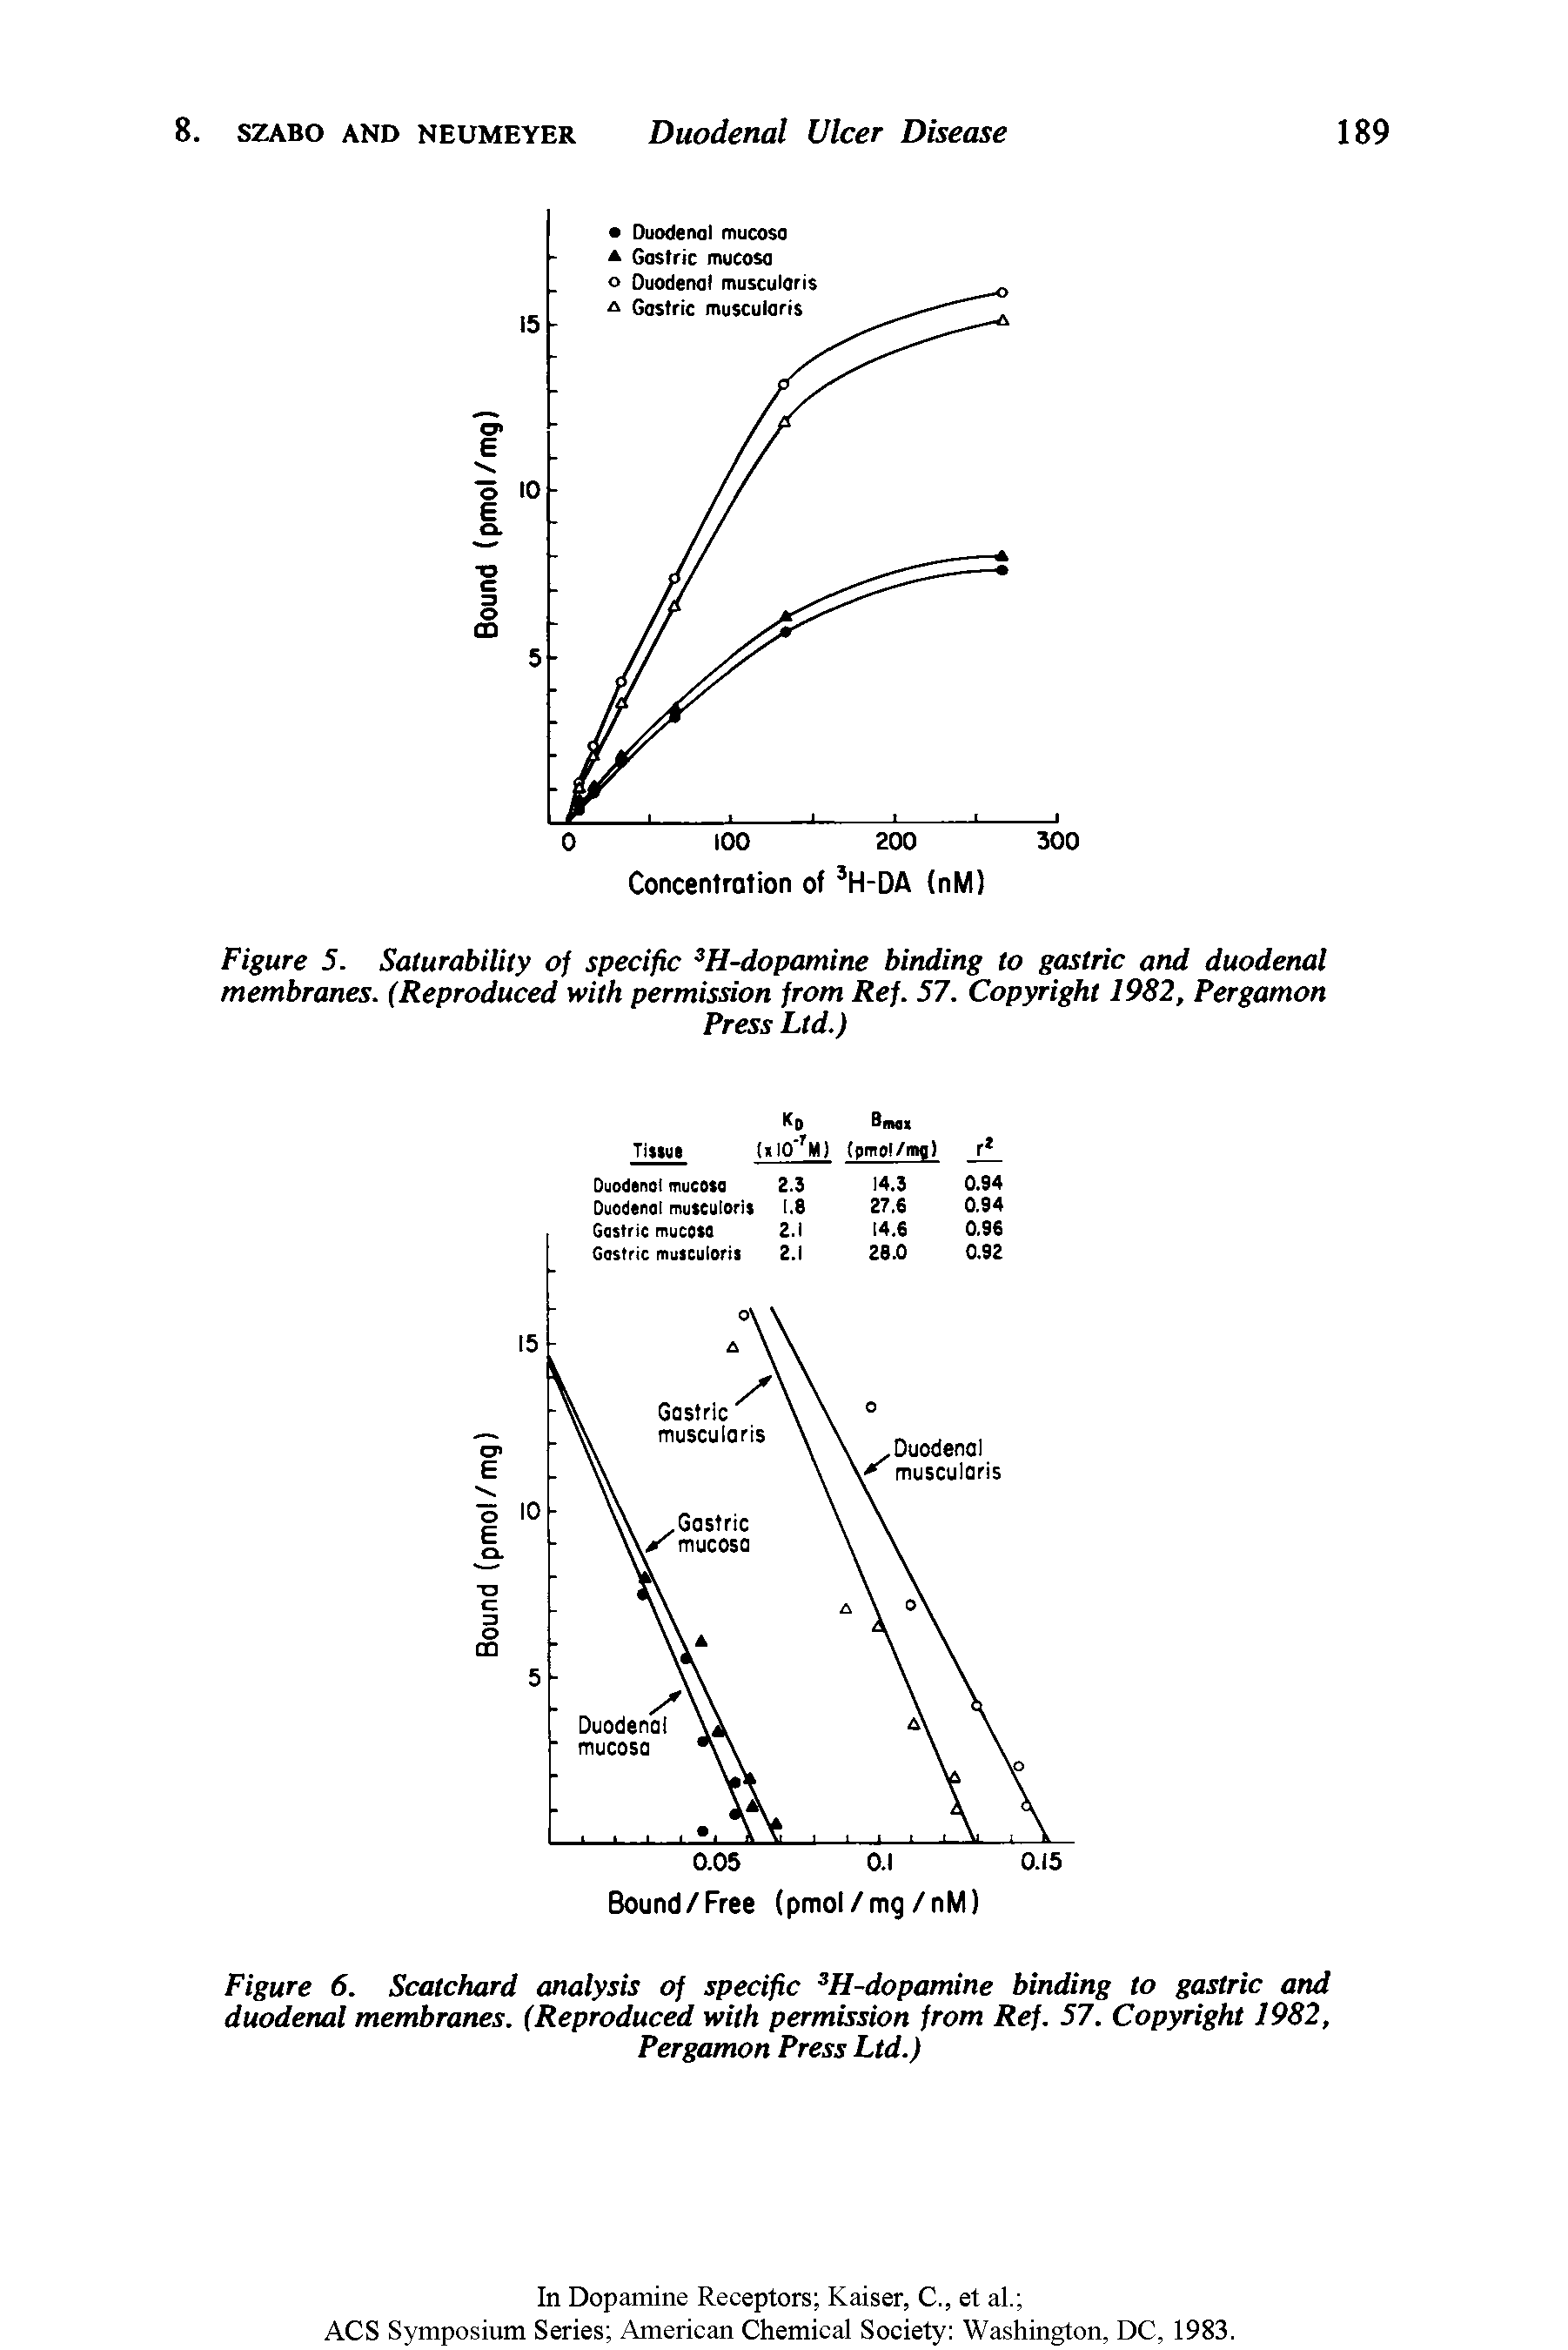 Figure 5. Saturability of specific 3H-dopamine binding to gastric and duodenal membranes. (Reproduced with permission from Ref. 57. Copyright 1982, Pergamon...